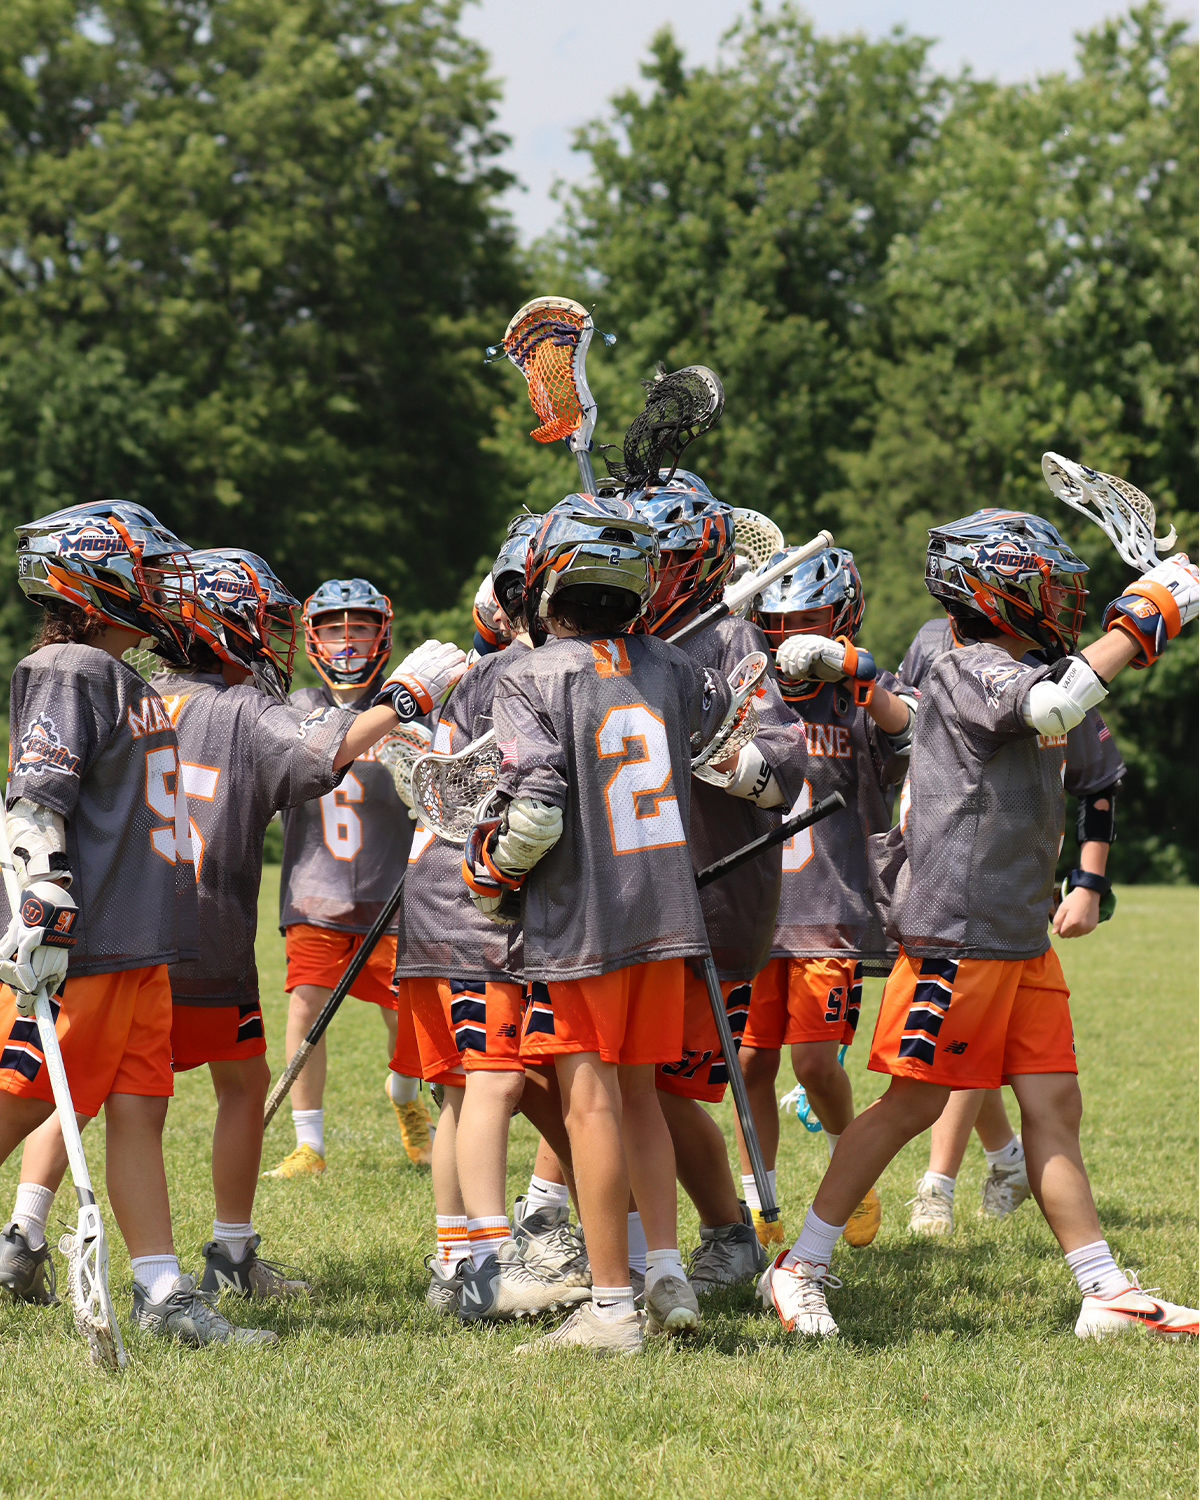 NLF Summer Kickoff National Lacrosse Federation